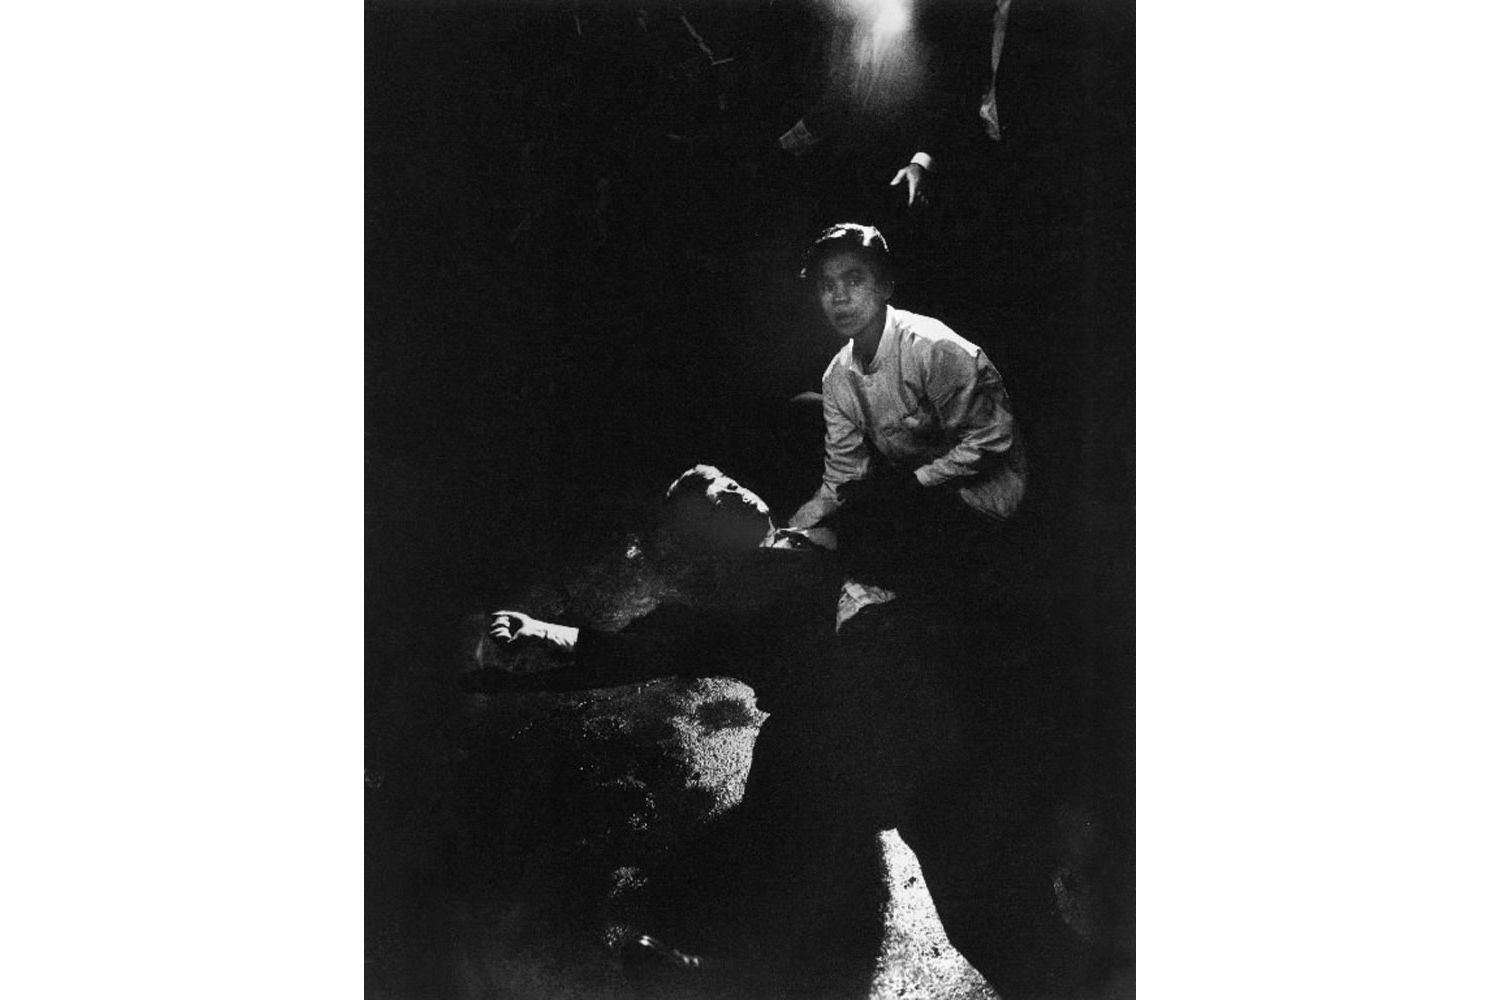 June 6, 1968.  Rigid, semiconscious, his face an ashen mask, Senator Kennedy lies in a pool of his own blood on the concrete floor, a bullet deep in his brain and another in his neck. Juan Romero, a busboy whose hand Kennedy had shaken before the shots, tried to comfort him.  - Original caption from LIFE Magazine